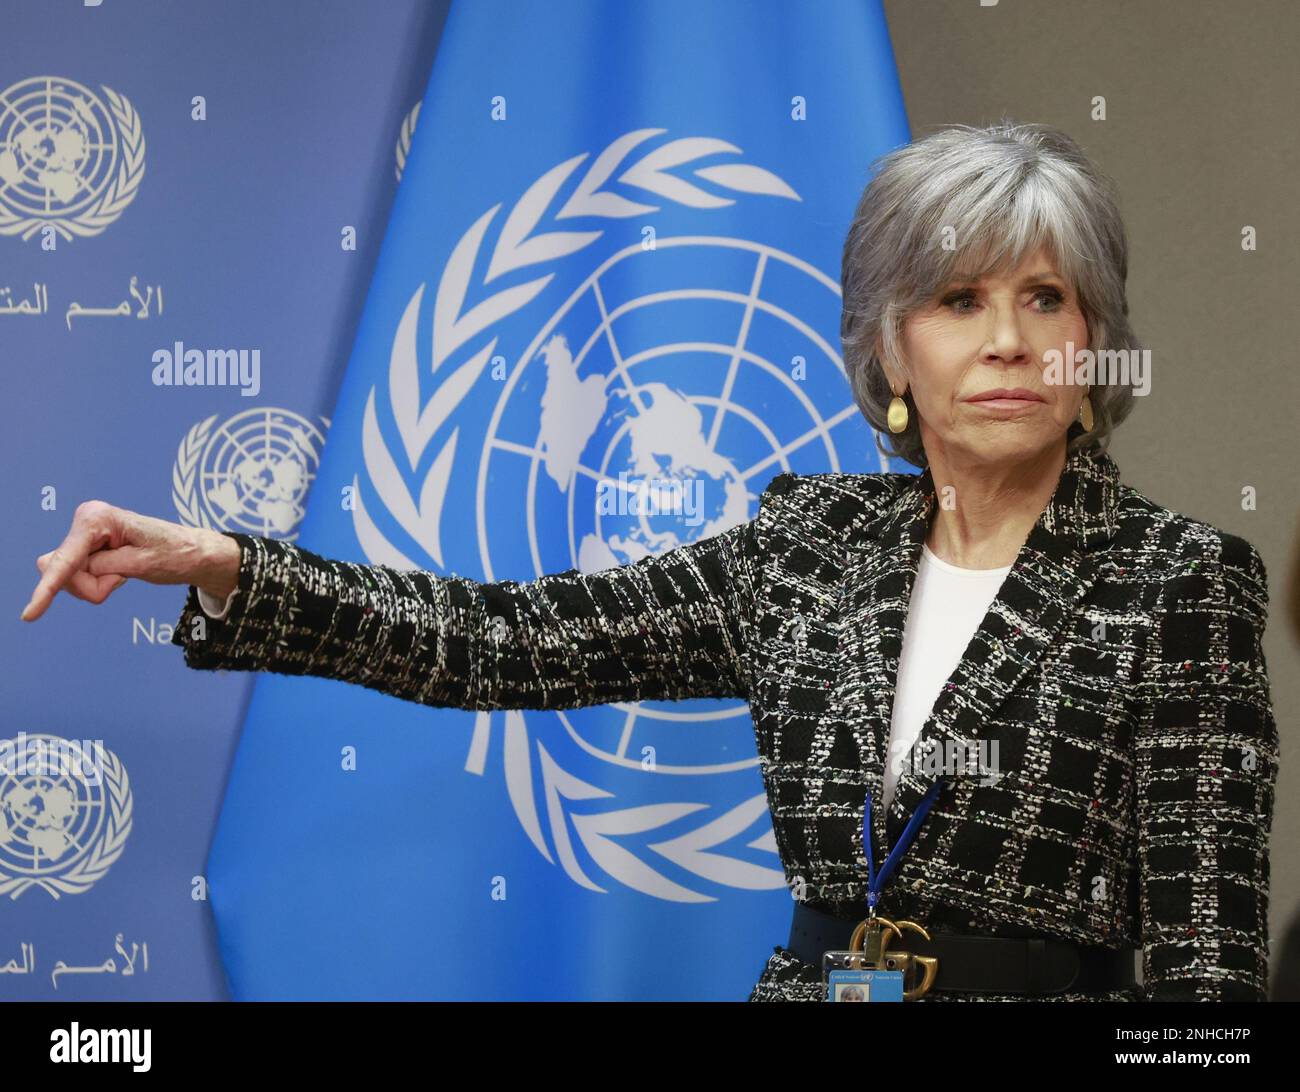 New York, United States. 21st Feb, 2023. Jane Fonda arrives to speak at a panel related to the UN High Seas Treaty at the United Nations Headquarters on Tuesday, February 21, 2023 in New York City. A new round of negotiations on the United Nations High Seas Treaty for conservation and sustainable use of marine biological diversity of areas beyond national jurisdiction (BBNJ) began in New York February 20, 2023. Photo by John Angelillo/UPI Credit: UPI/Alamy Live News Stock Photo